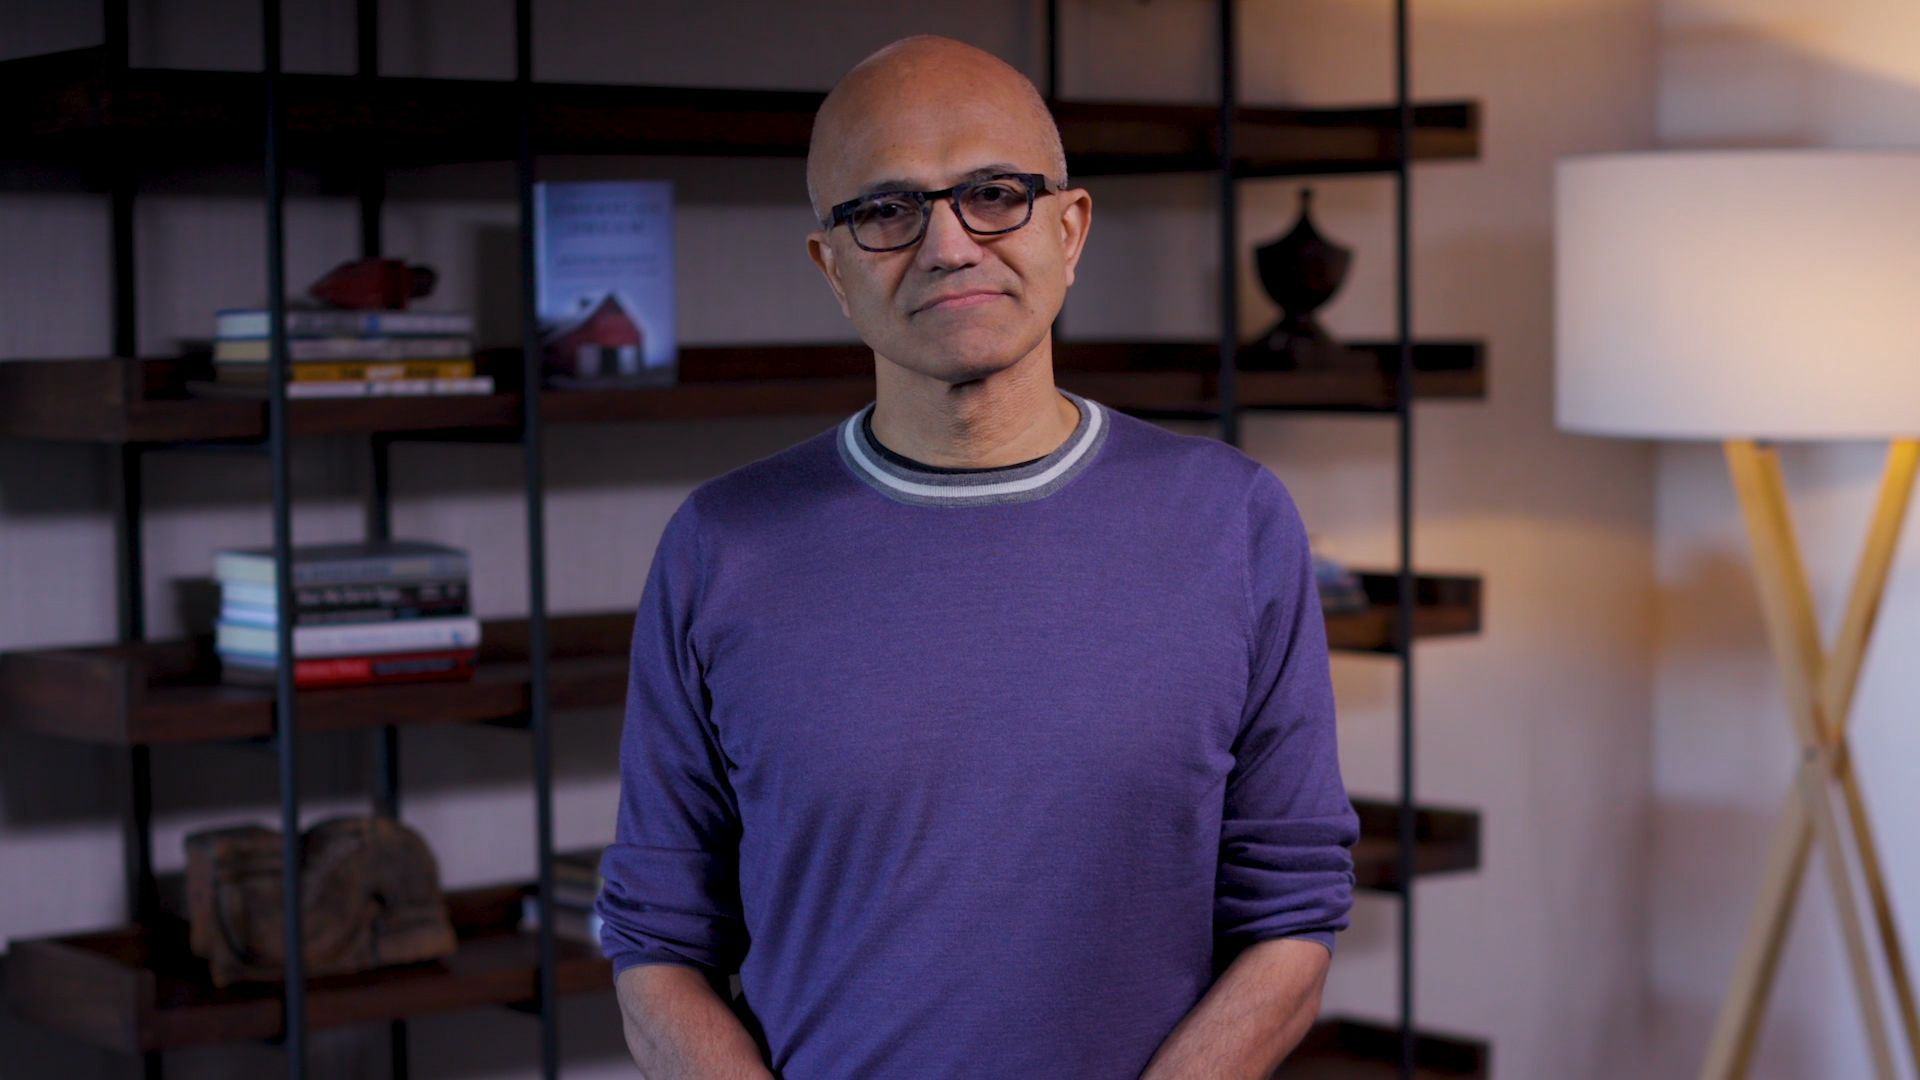 Microsoft CEO Satya Nadella, in an interview with Axios on HBO